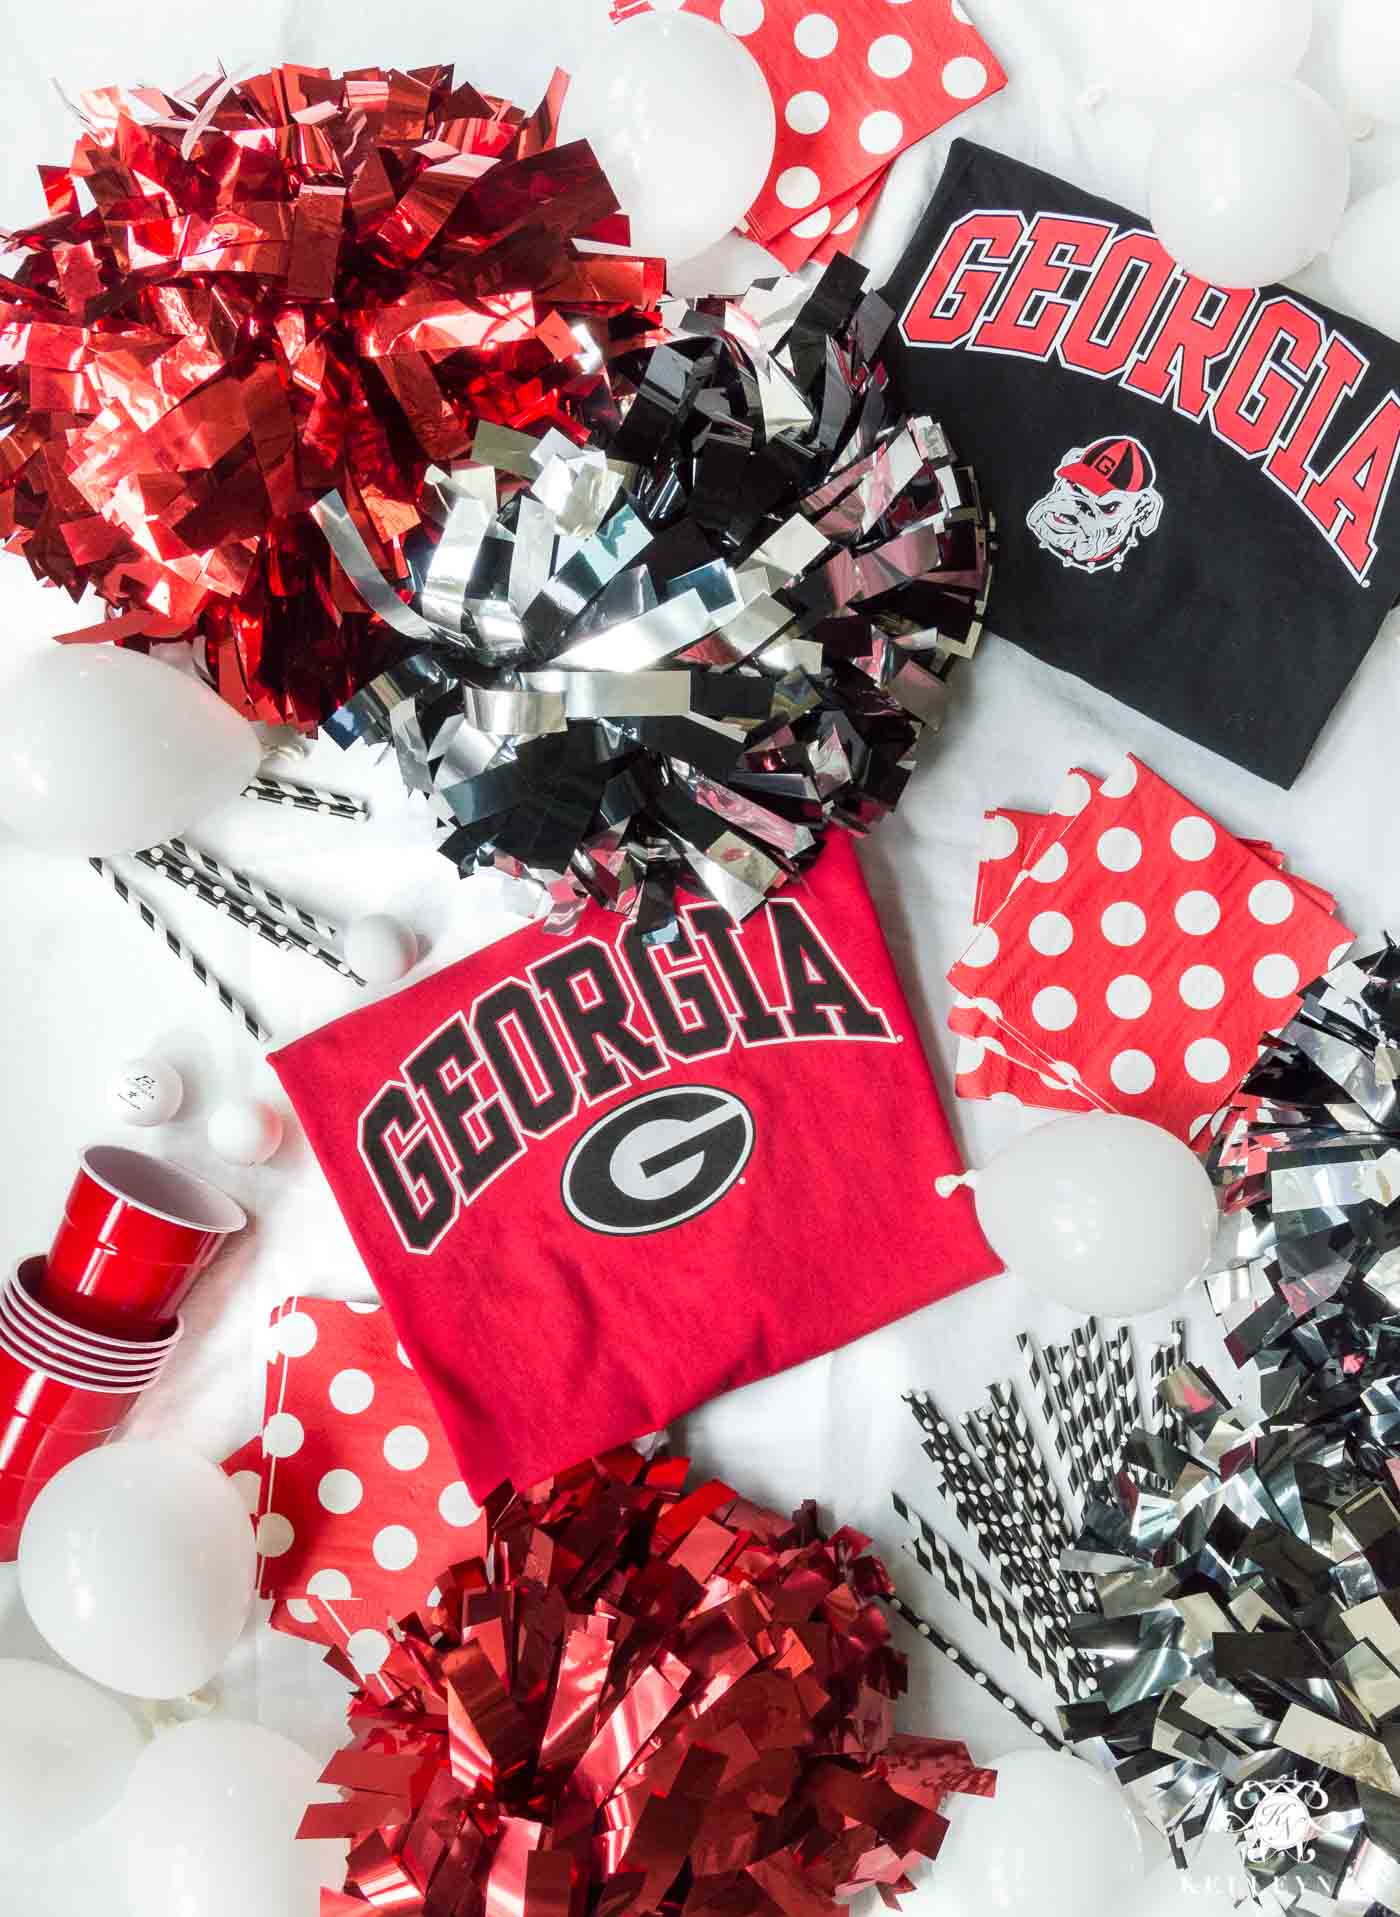 UGA gear and party supplies